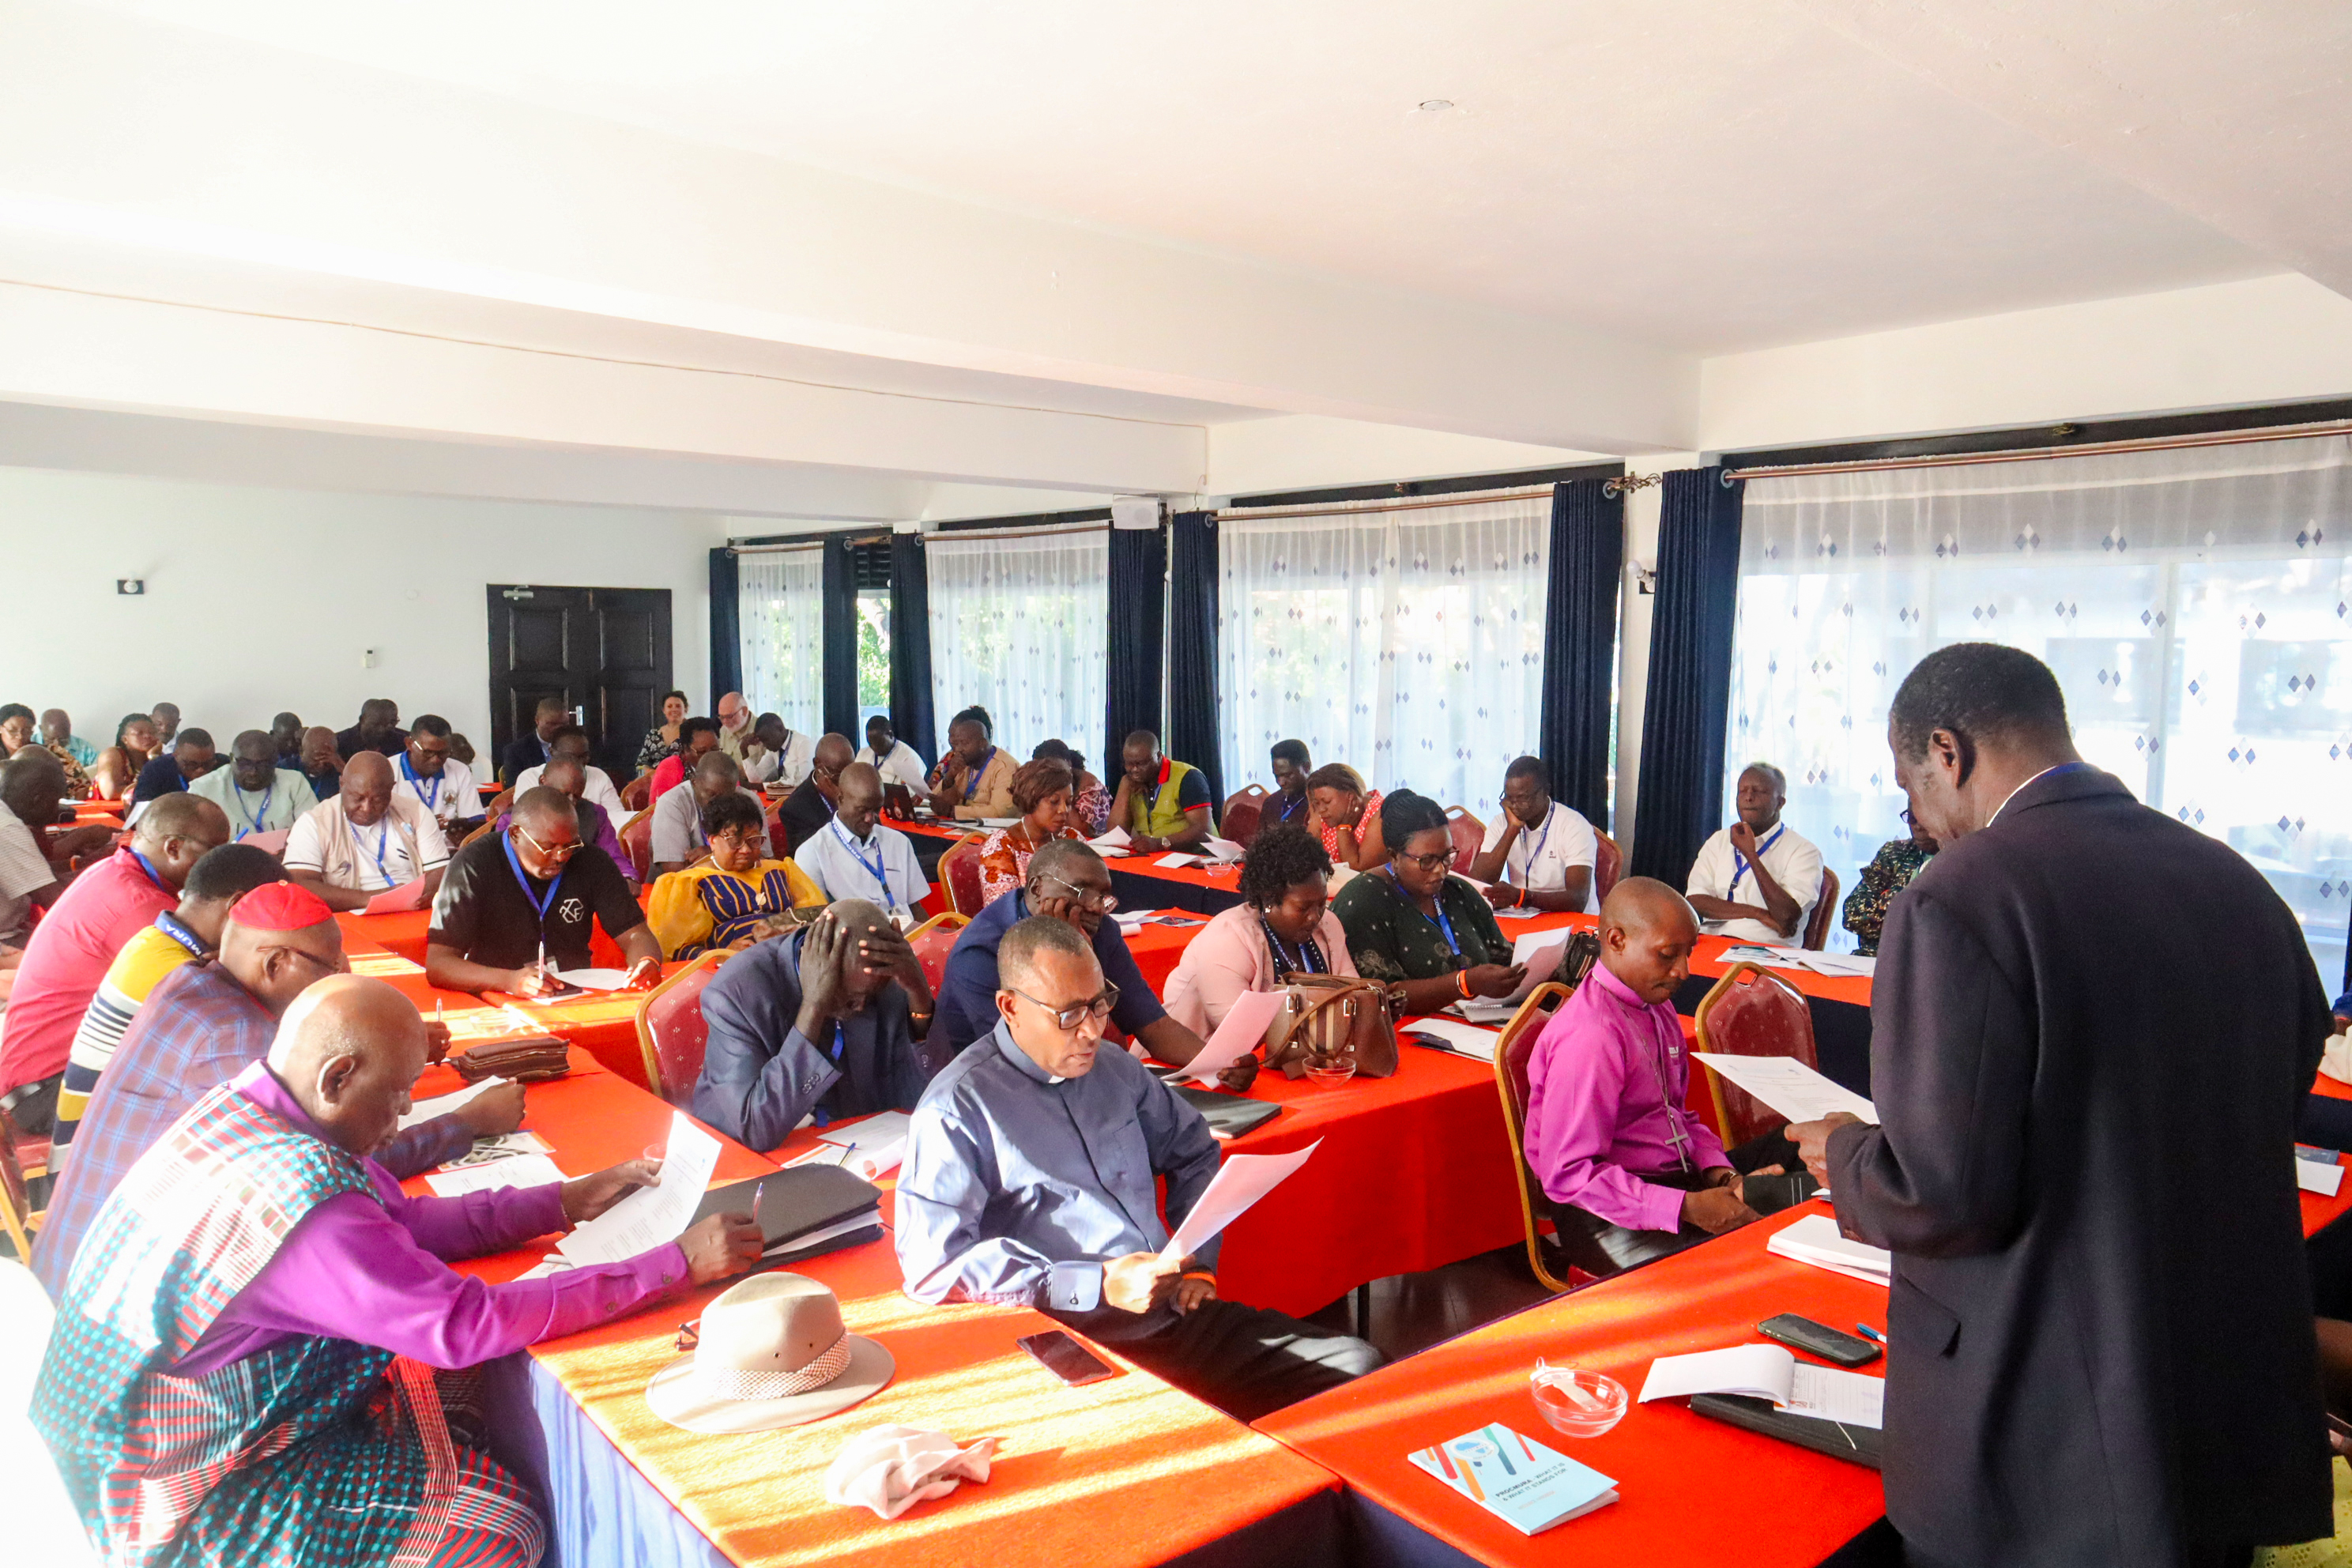 Church Leaders’ Workshop on the Transforming Mission of the Church Amidst Violent Conflicts and the Changing Expressions of Religions in A Growing Religious Pluralistic Africa